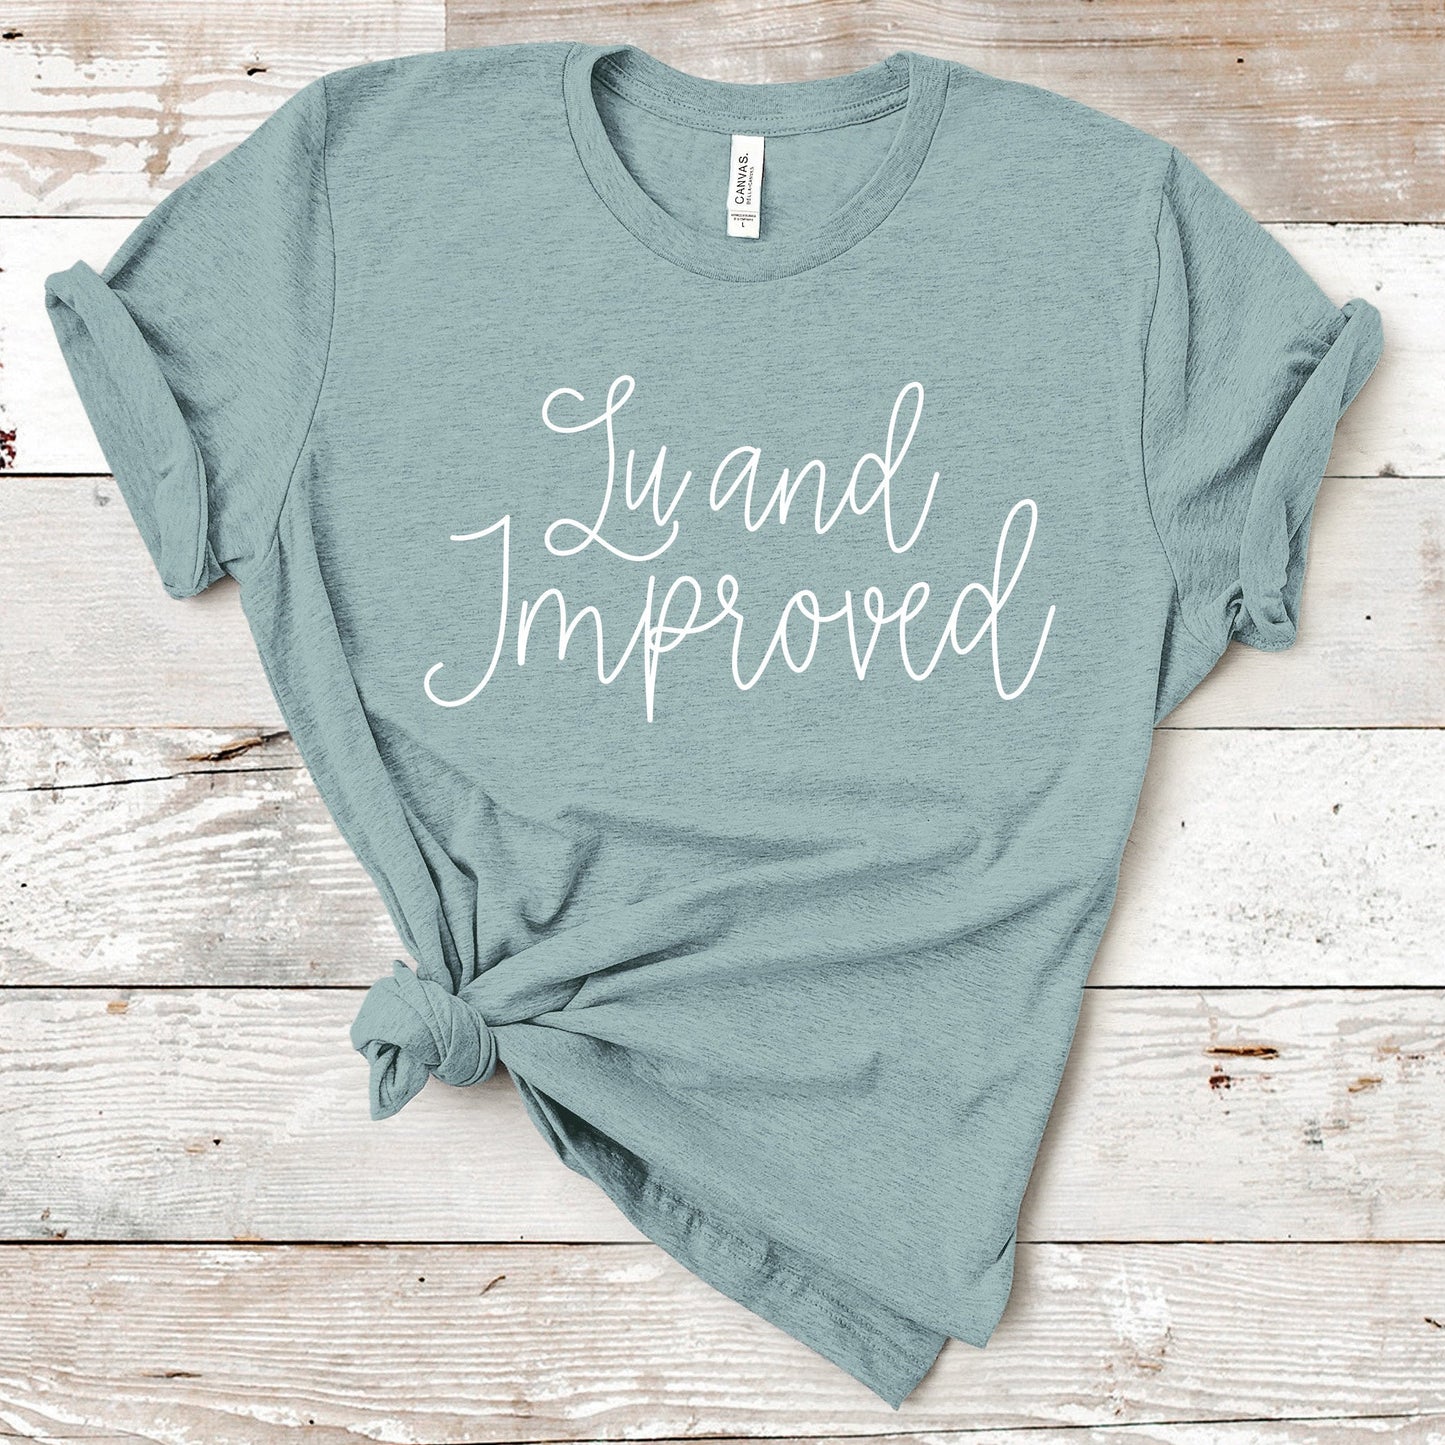 Lu and Improved | RHONY Quote | Unisex Short Sleeved Shirt | Multiple Color Options | Made To Order